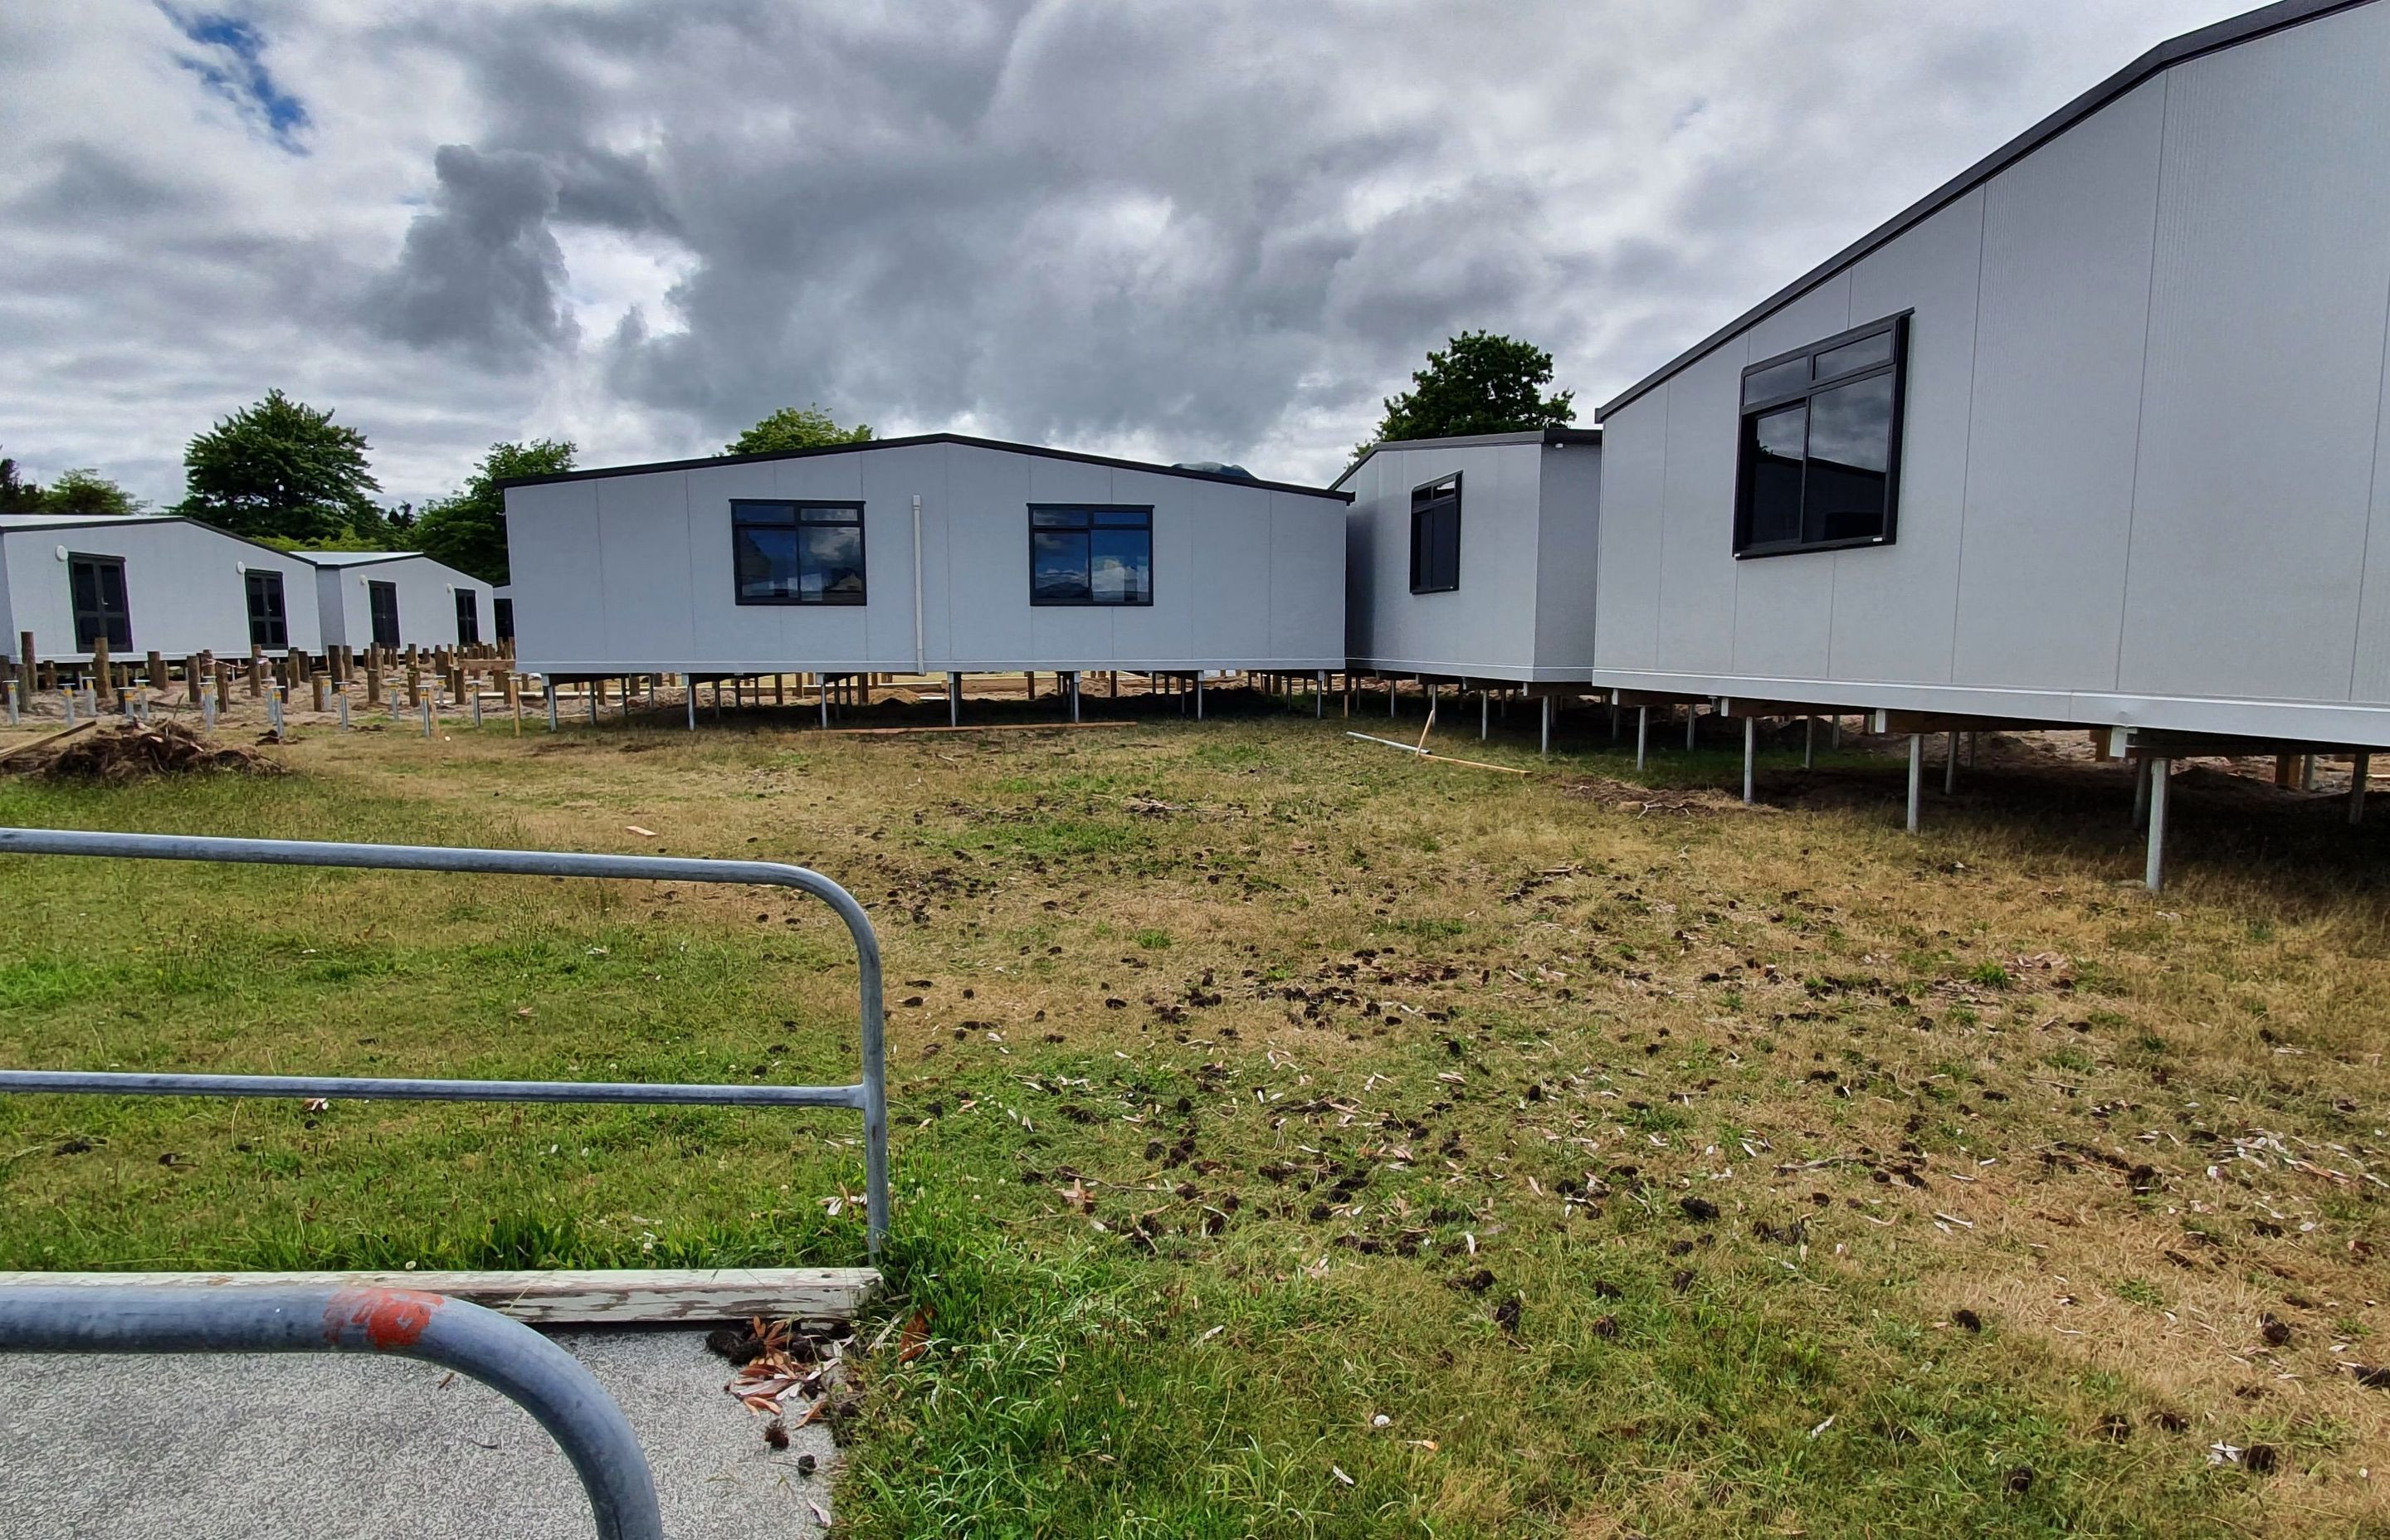 Eighteen new prefab classrooms and two ablutions blocks needed to be installed and fully operational before day one of the first term this year.